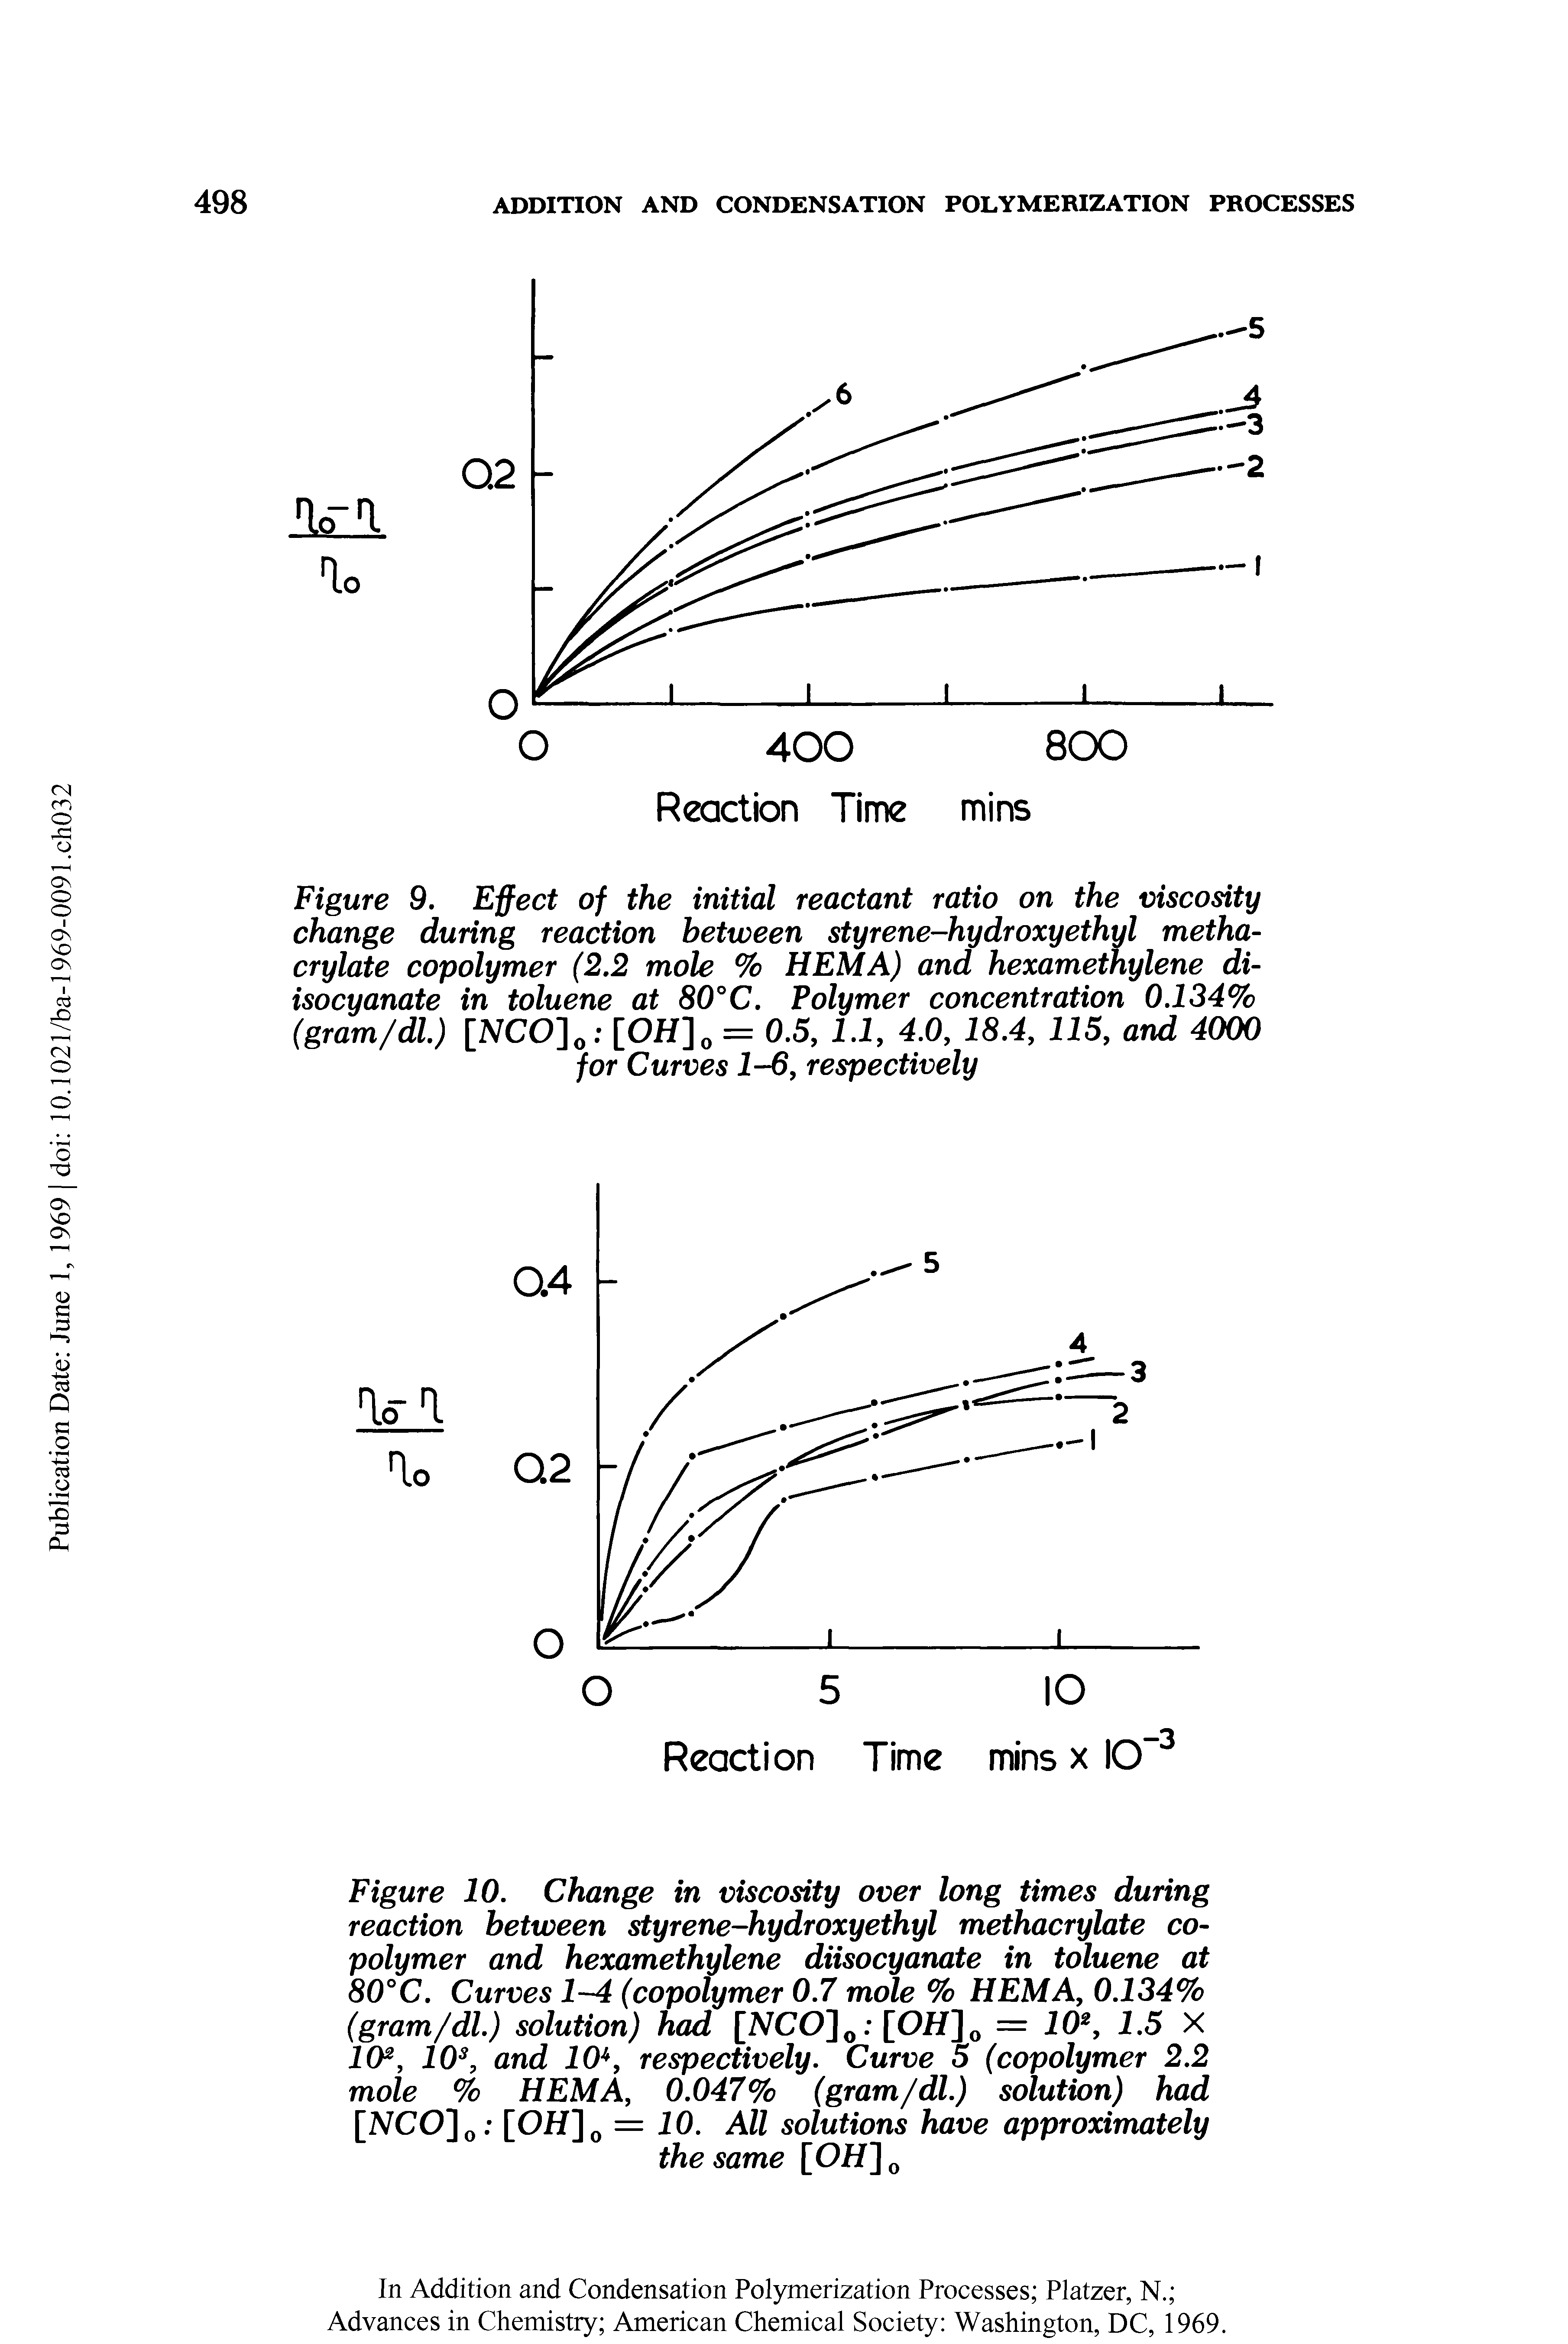 Figure 10. Change in viscosity over long times during reaction between styrene-hydroxyethyl methacrylate copolymer and hexamethylene diisocyanate in toluene at 80° C. Curves 1-4 (copolymer 0.7 mole % HEM A, 0.134% (gram/dl.) solution) had [NCO] 0 [O//] 0 = 102, 1.5 X 102, 10s, and 10u, respectively. Curve 5 (copolymer 2.2 mole % HEM A, 0.047% (gram/dl.) solution) had [IVCO]0 [OH]0 = 10. All solutions have approximately the same [OH]0...